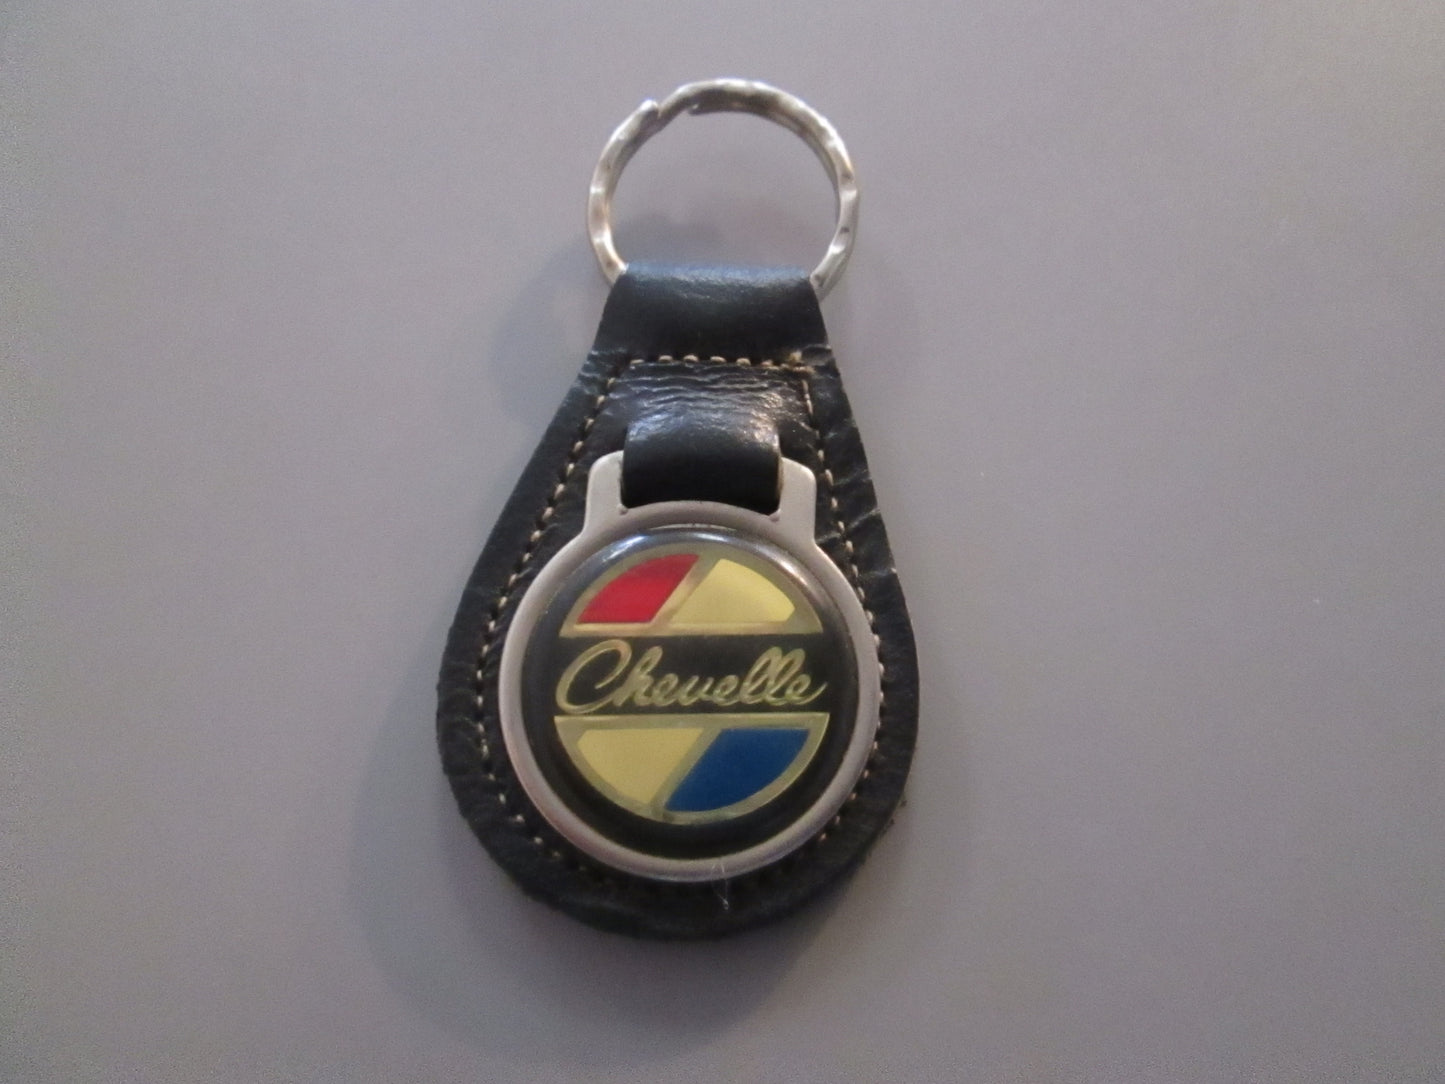 Vintage Leather Fob Key Holder for Chevy Chevelle